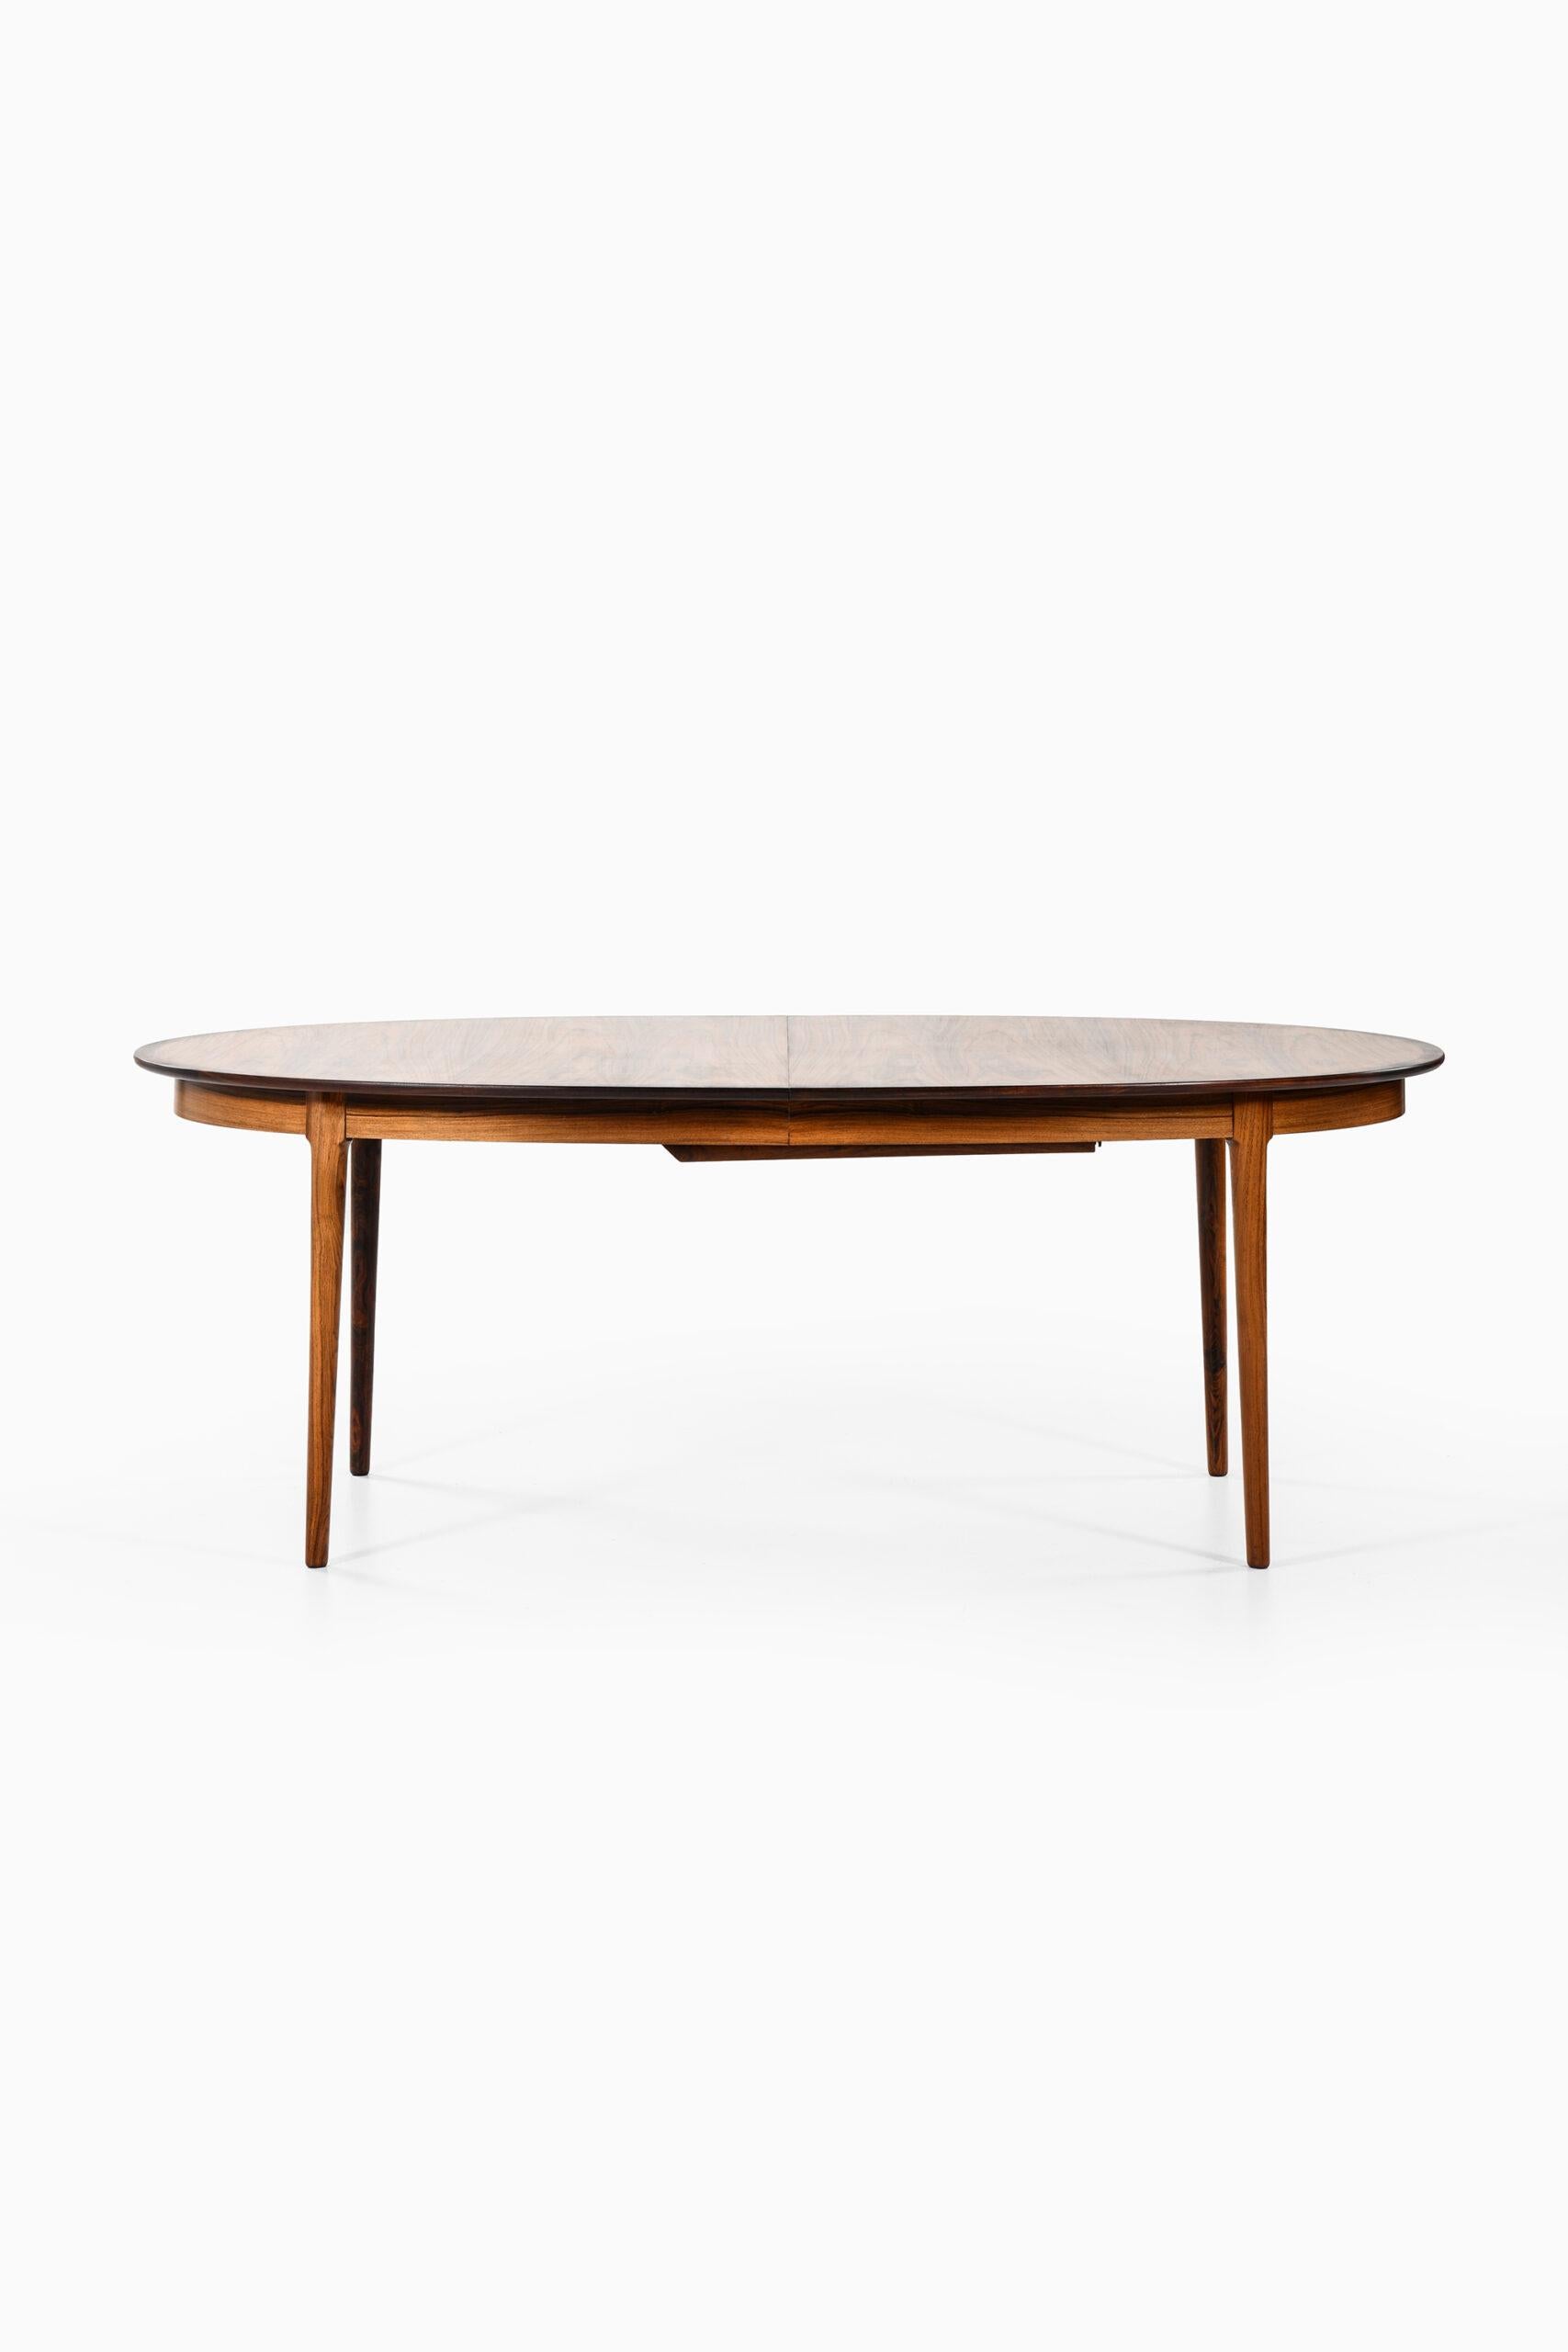 Rare dining table designed by Torbjørn Afdal. Produced by Bruksbo in Norway.
Width: 210 ( 310 ) cm.